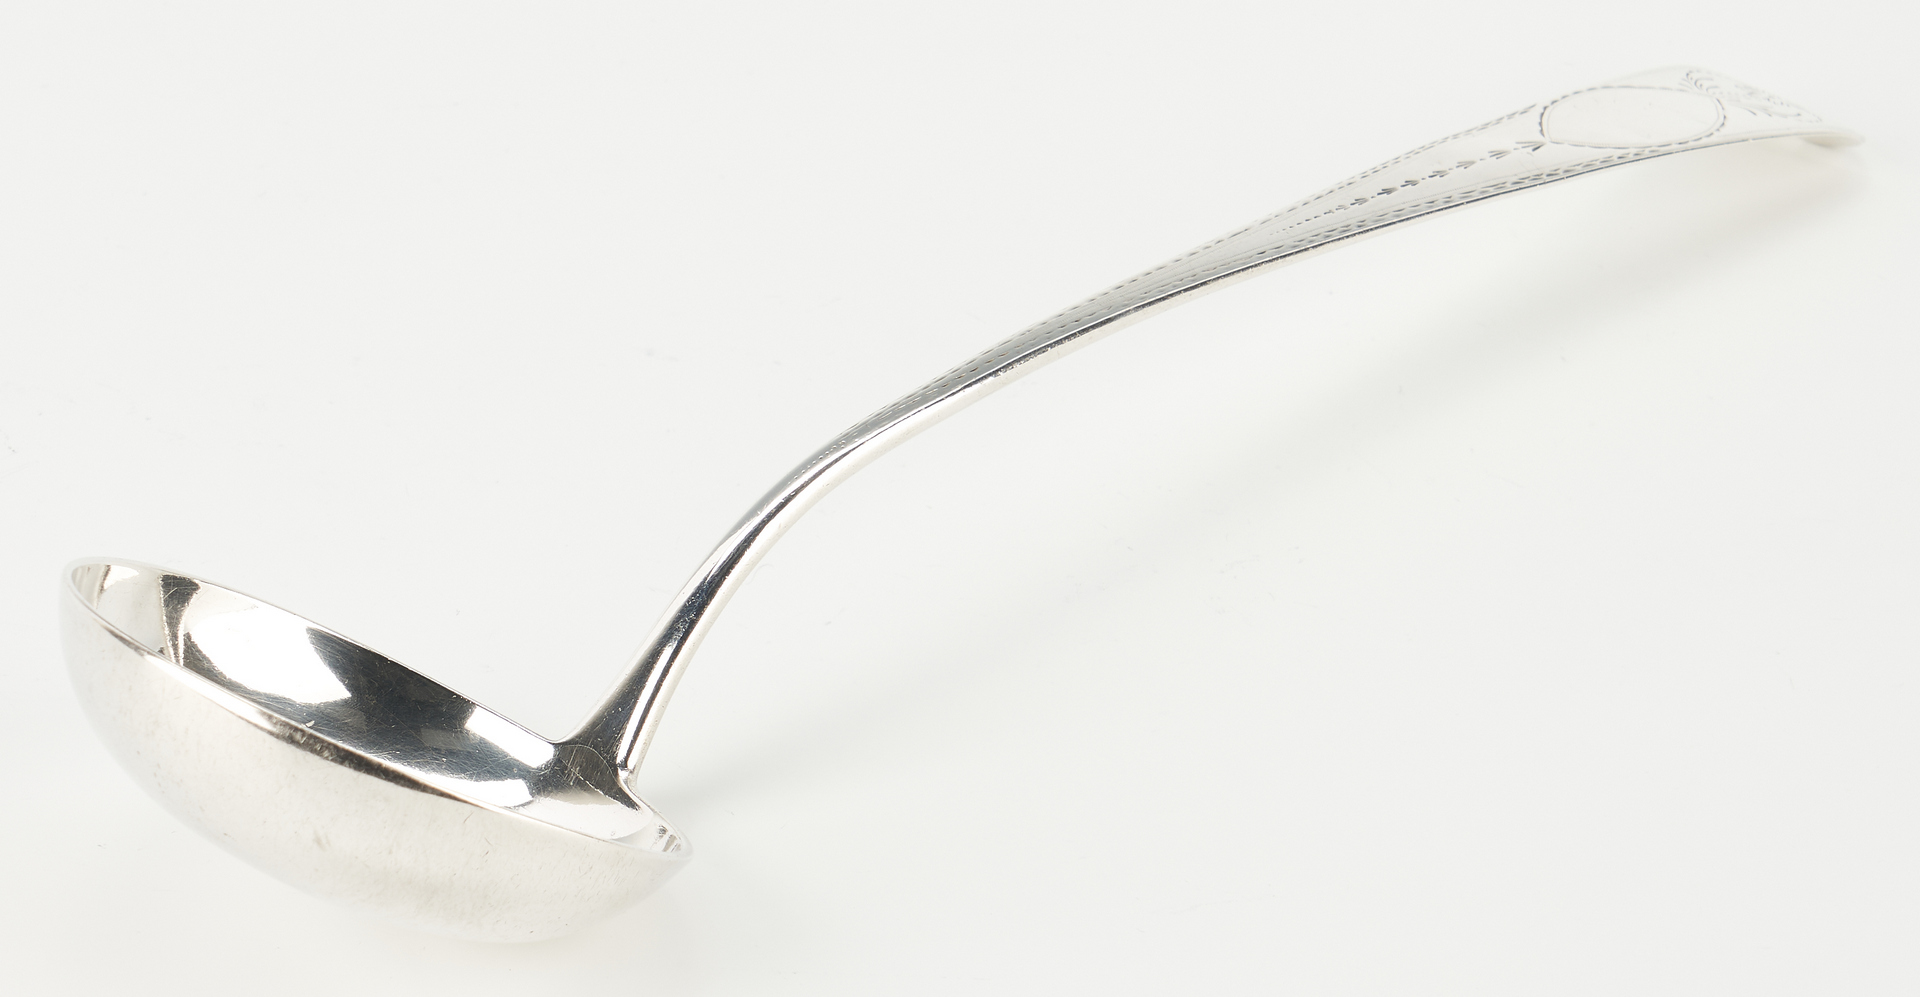 Lot 321: Baltimore coin silver ladle, Stone and Warner, Overstruck